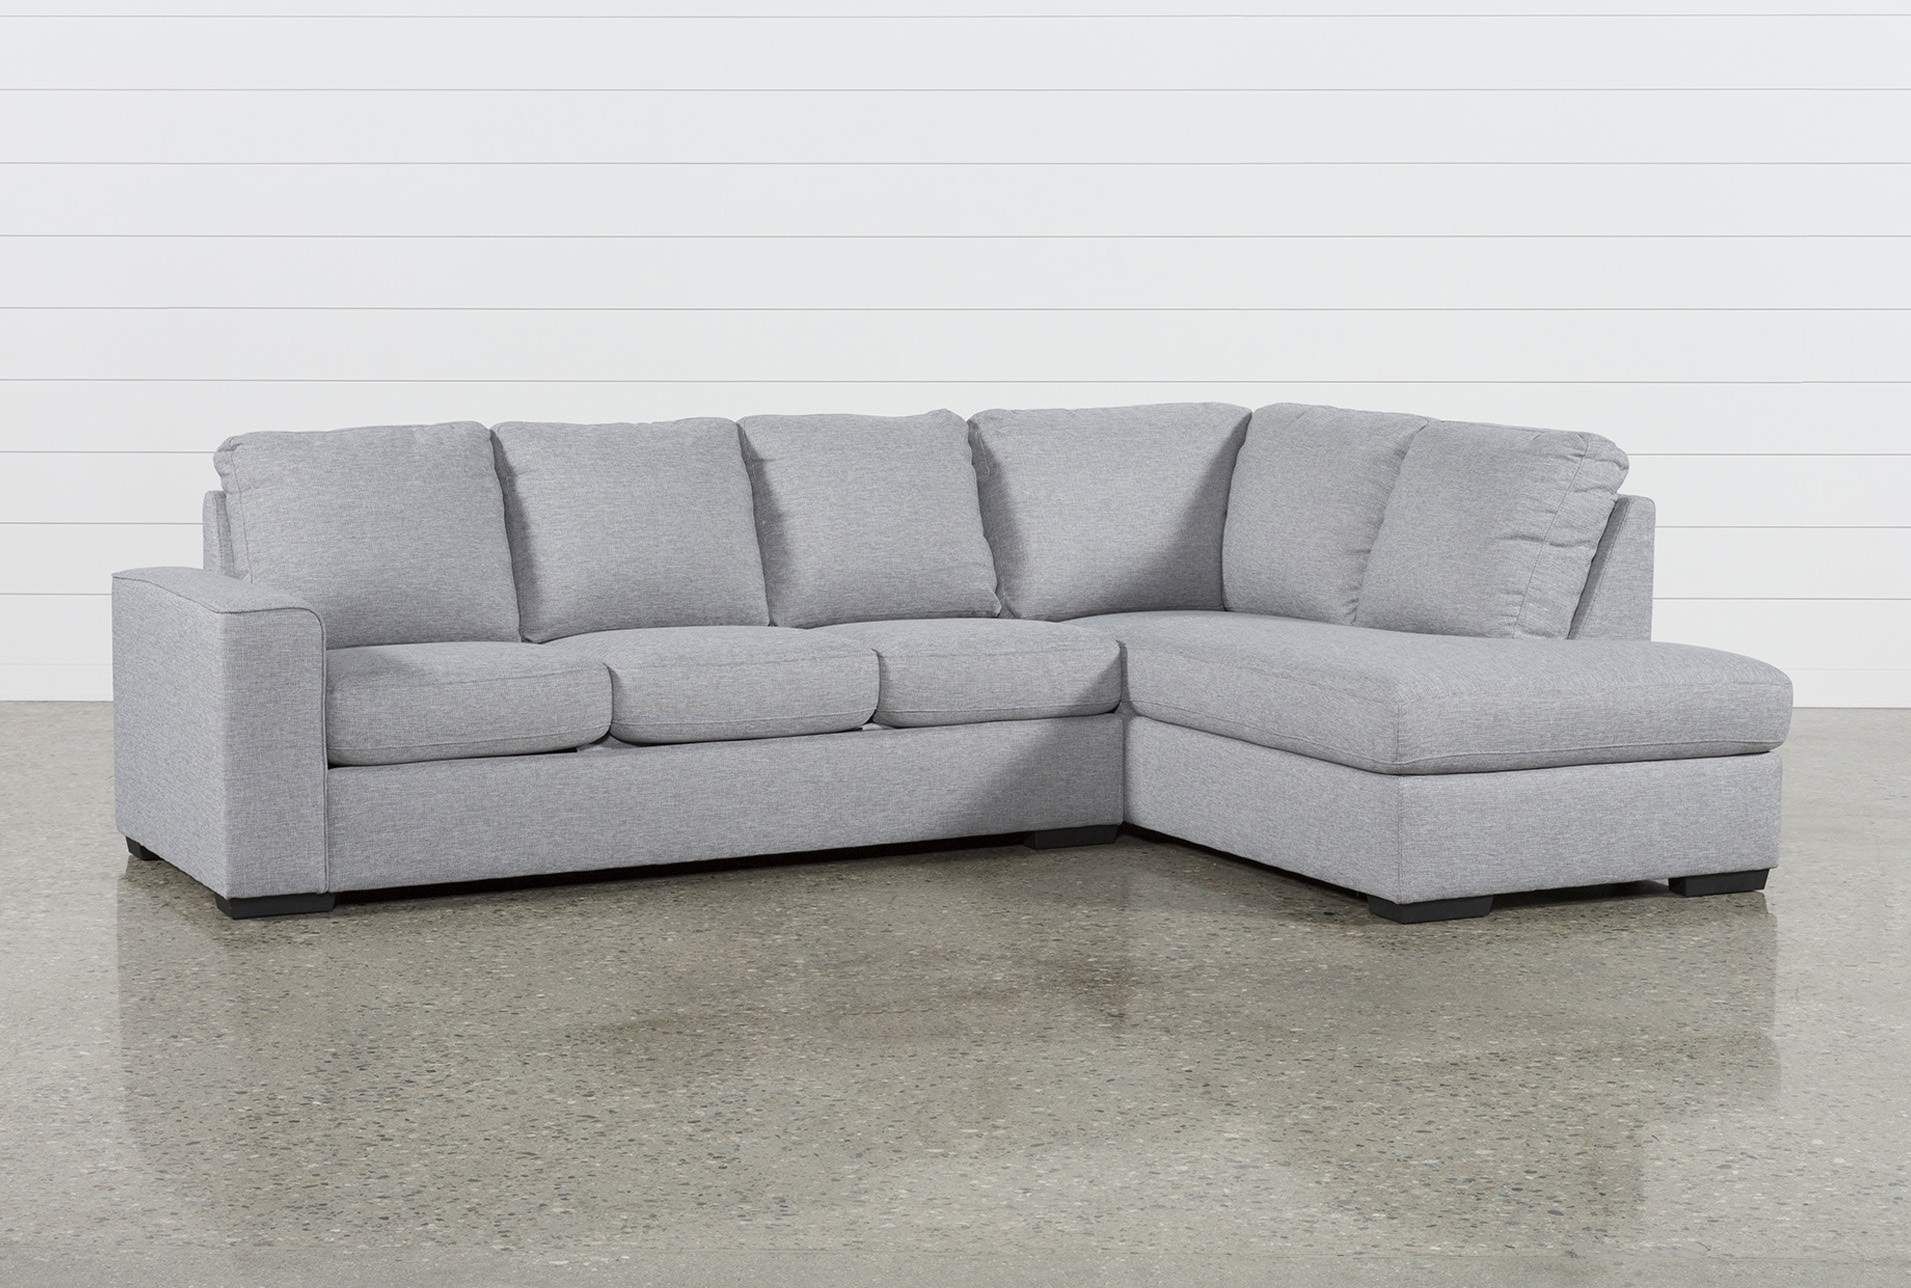 Lucy Grey 2 Piece Sectional Sofa With Right Arm Facing Pertaining To Monet Right Facing Sectional Sofas (View 15 of 15)